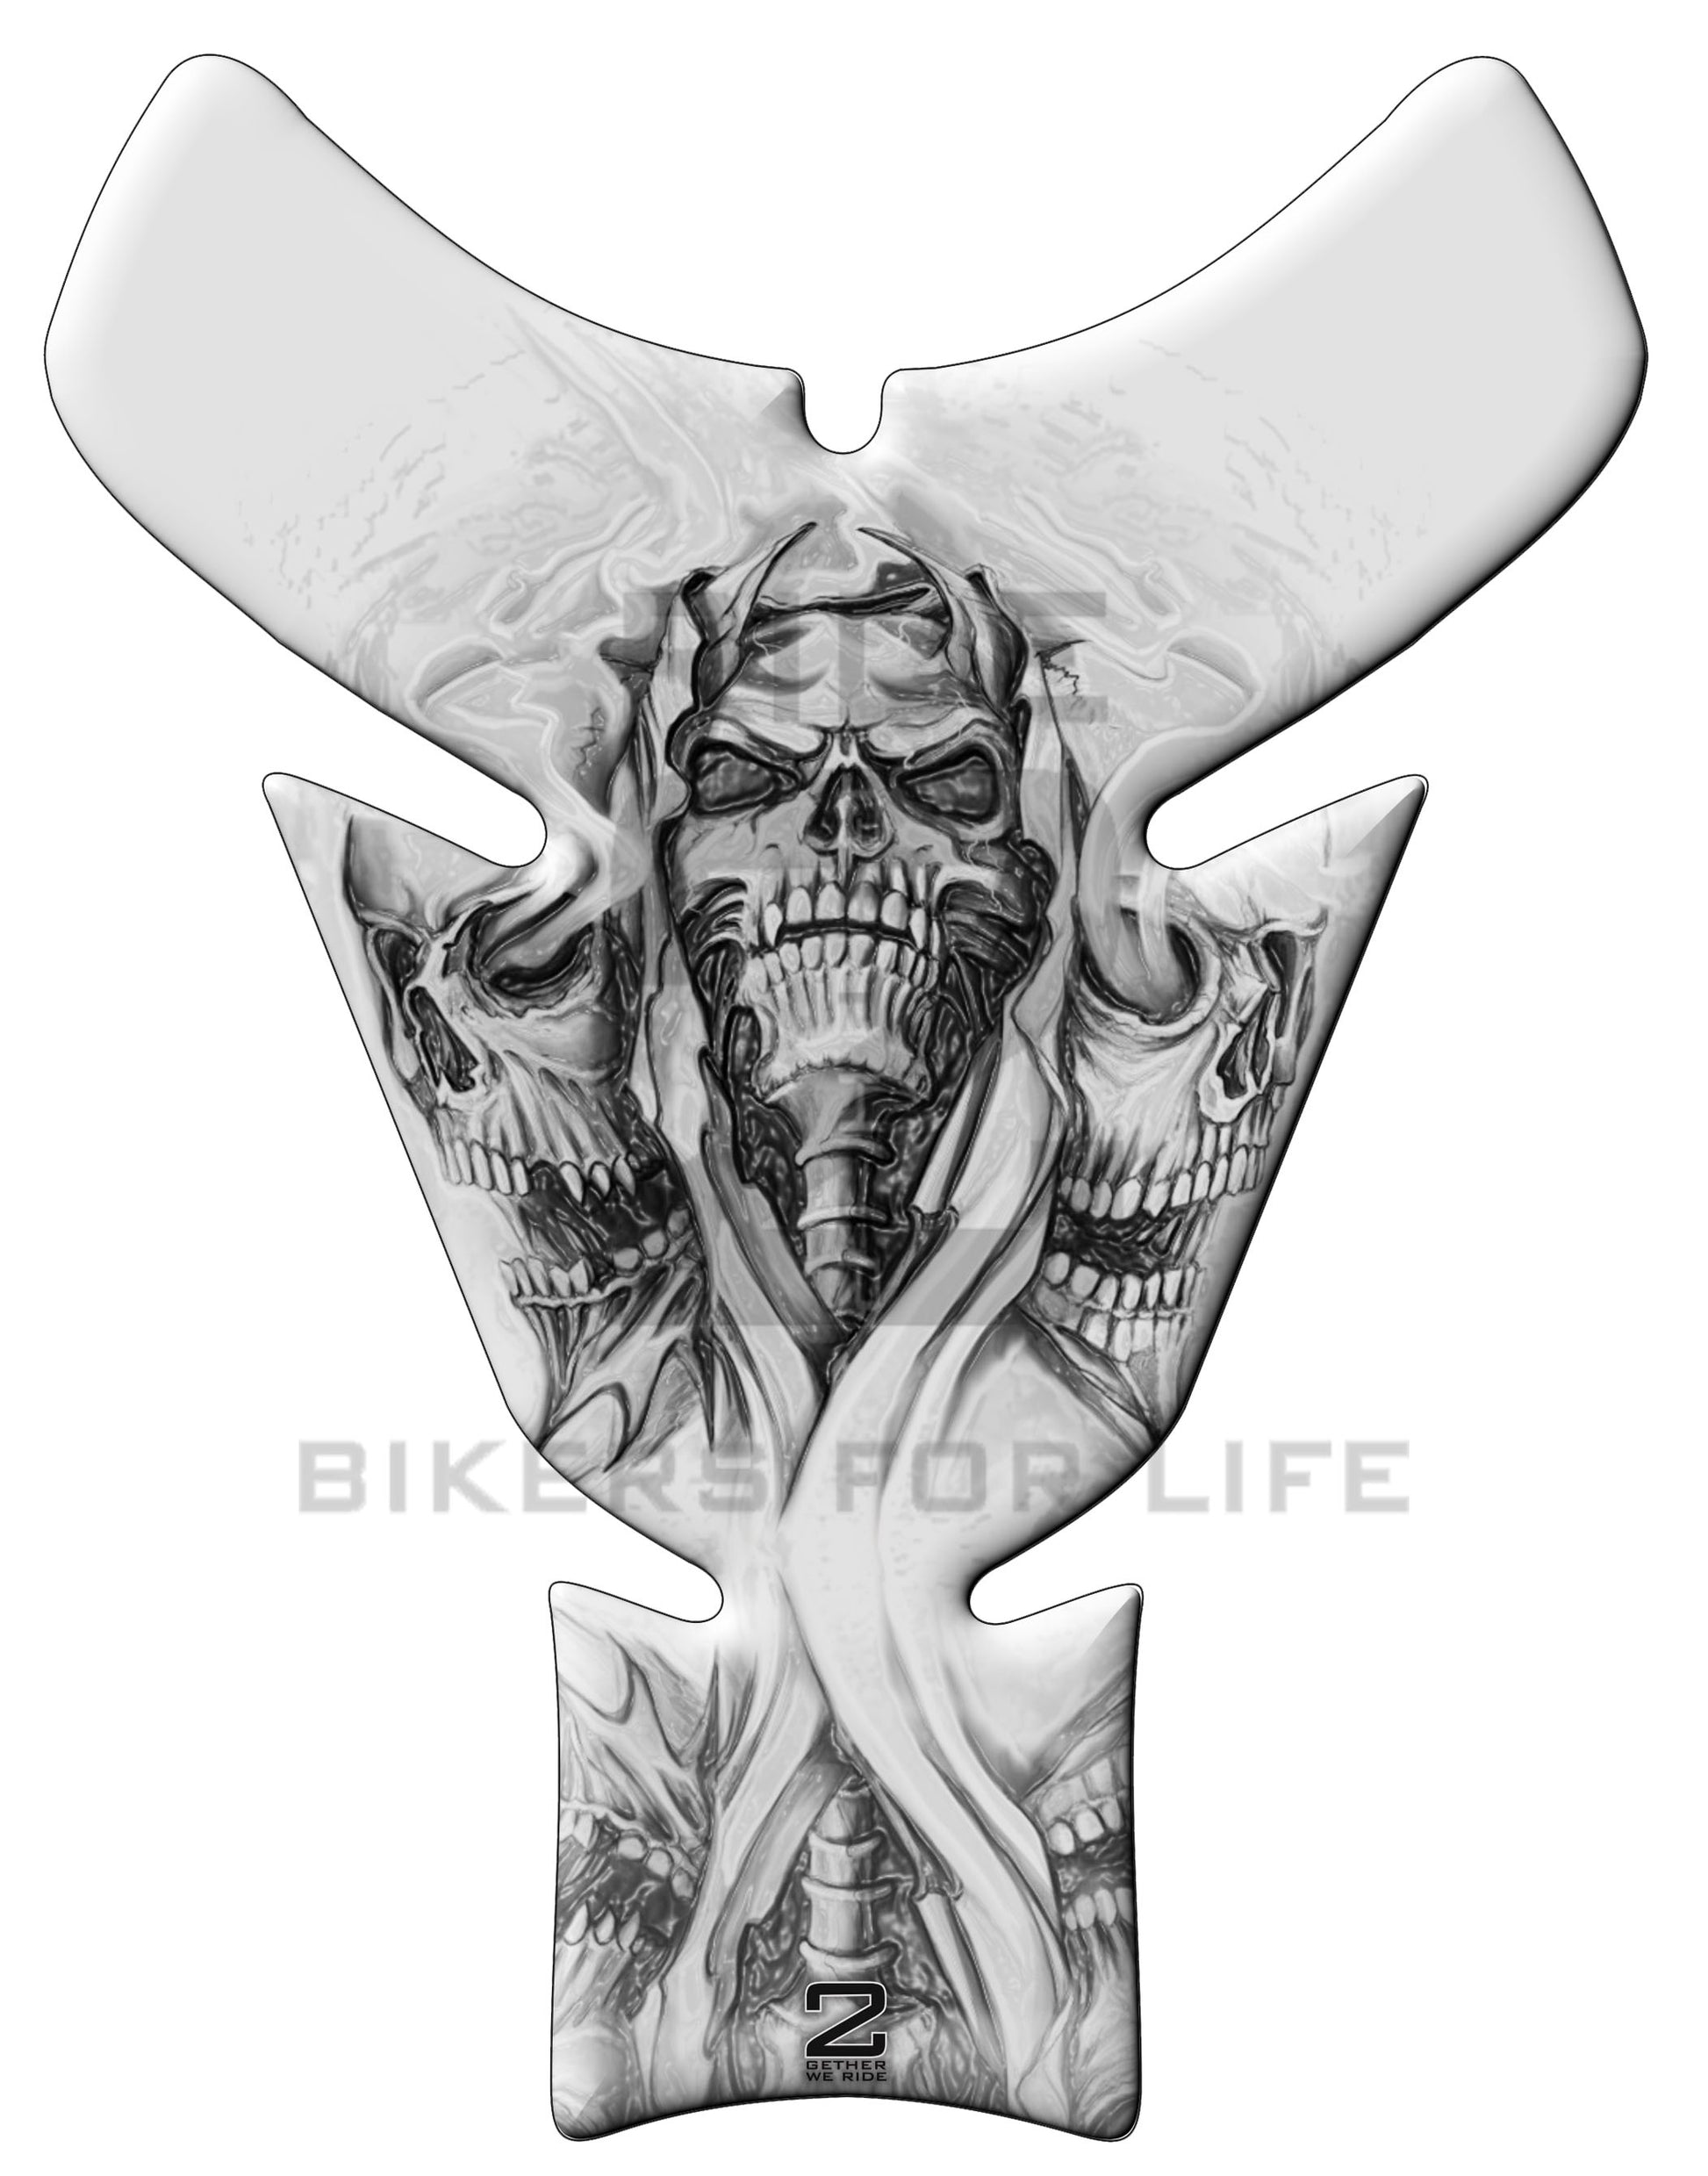 Universal Fit White Reaper Bohemian Rhapsody Tank Pad Protector. A Street Pad which fits most motorcycles.